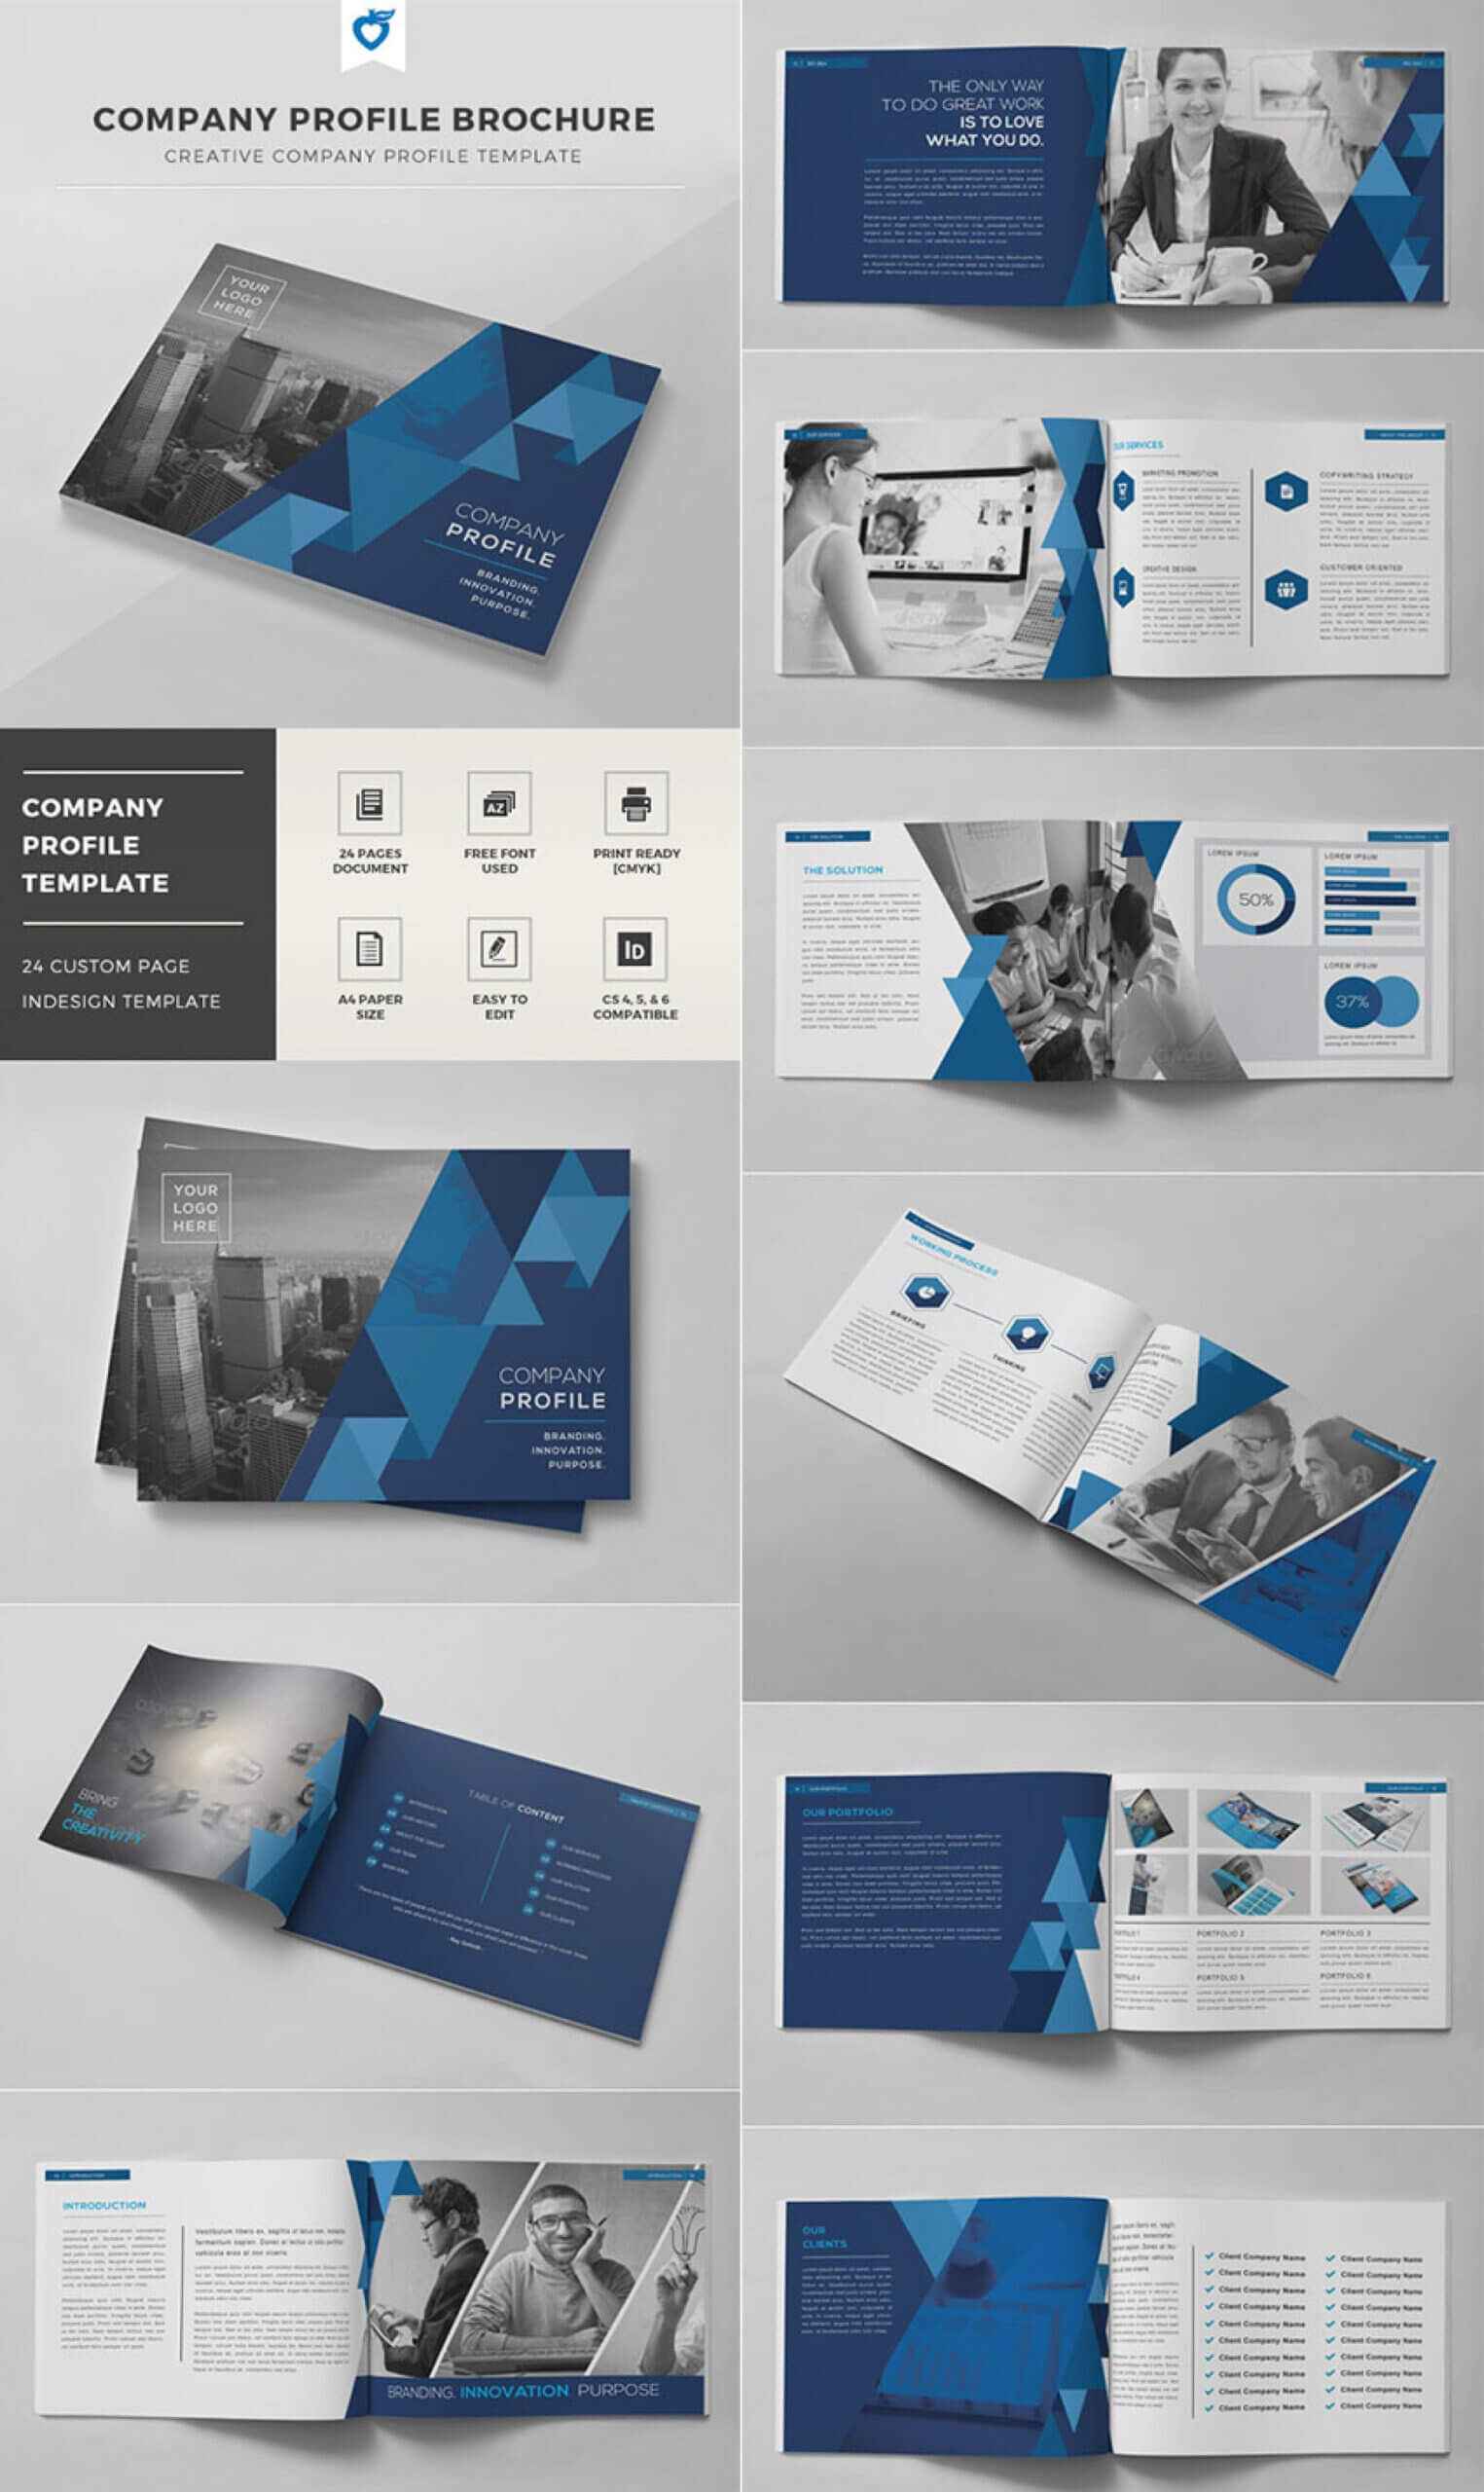 003-indesign-brochure-templates-free-download-template-ideas-in